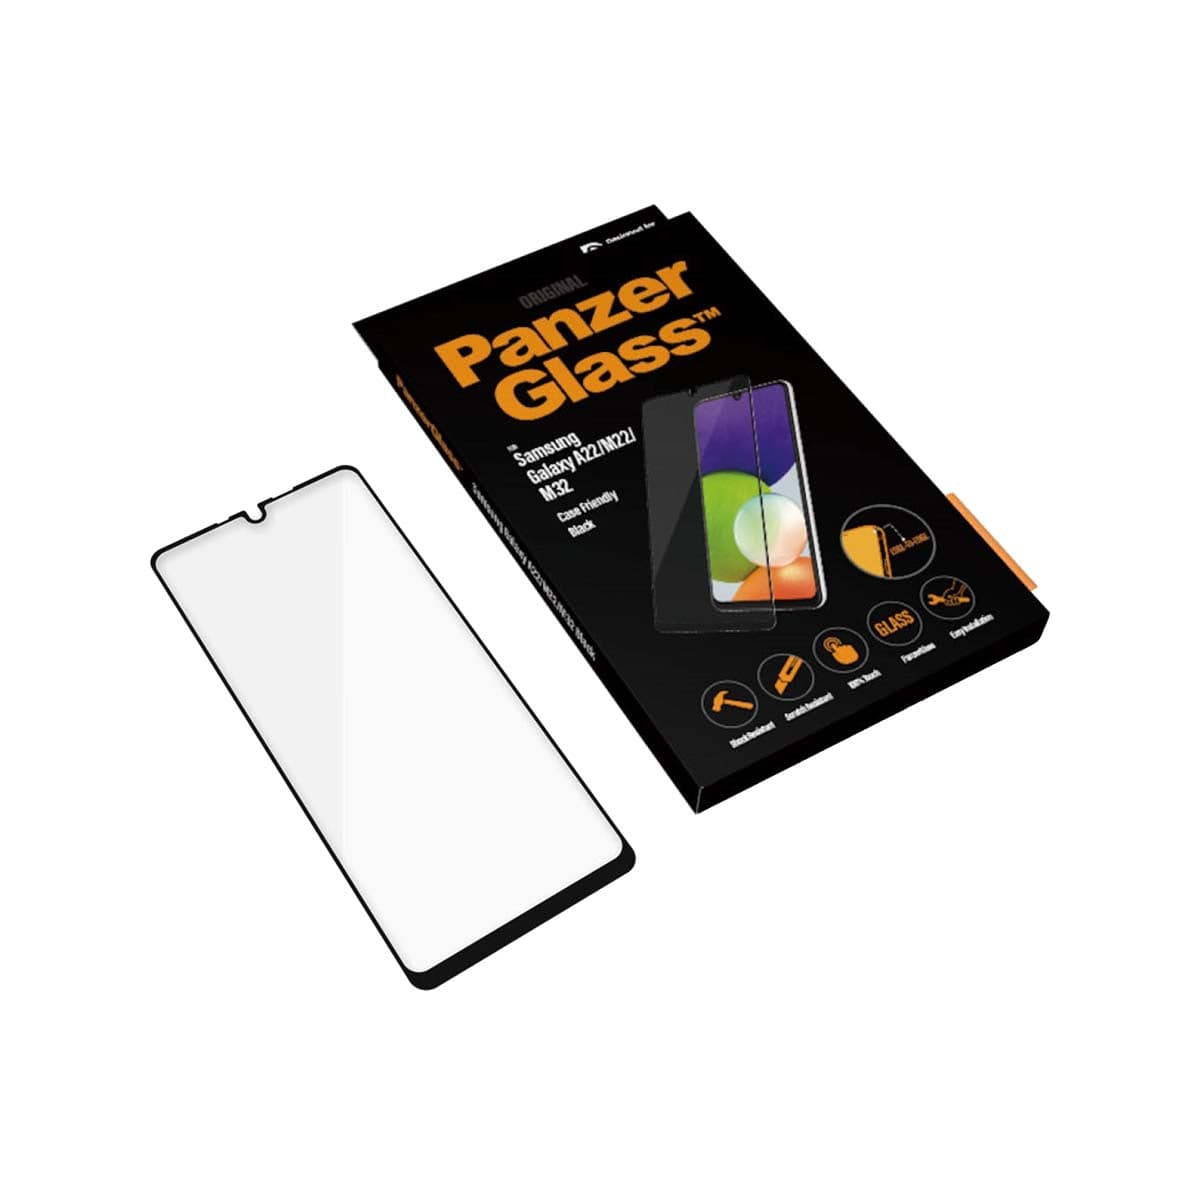 PanzerGlass Phone Screen Protector for Samsung A22 4G - Clear.